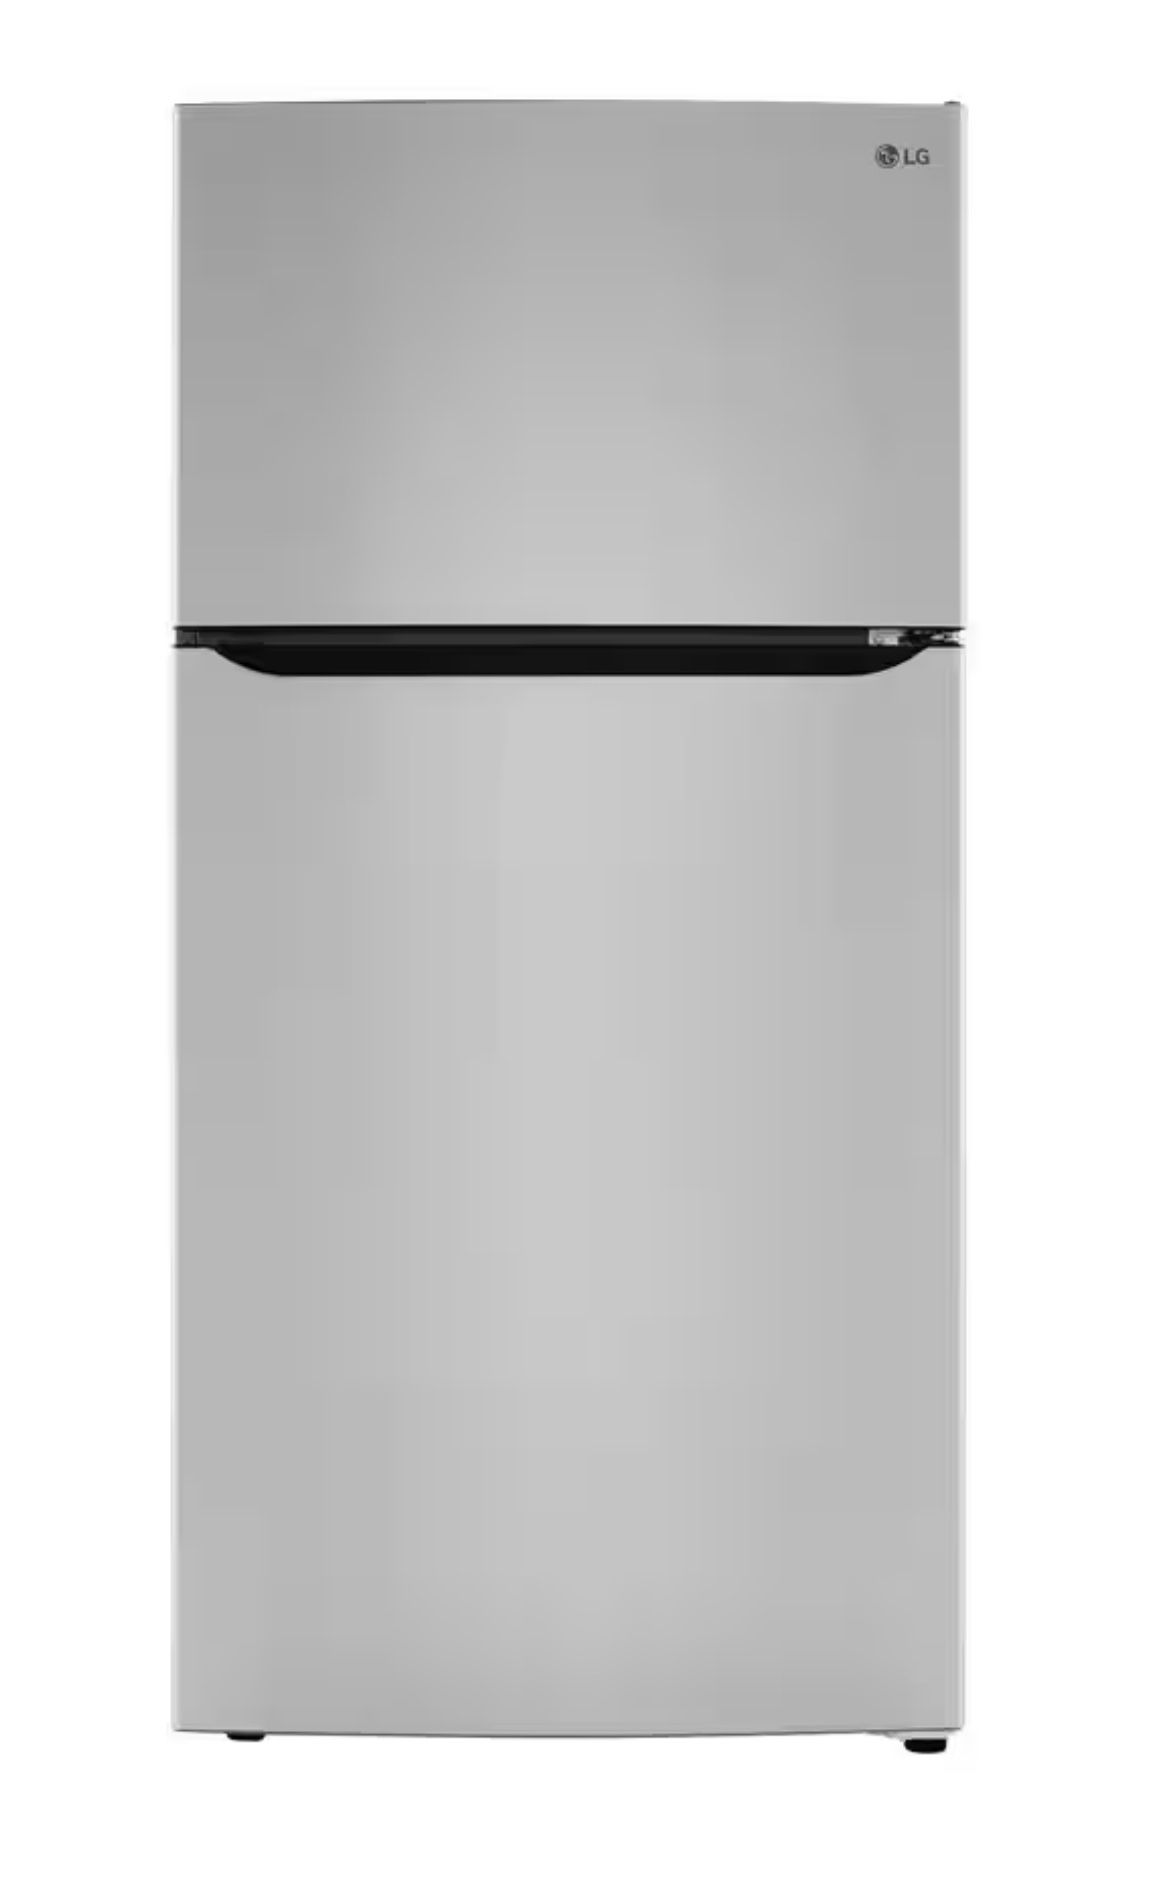 24 cu. ft. Top Mount Freezer Refrigerator with Multi-Flow Air System in Stainless Steel, Garage Ready